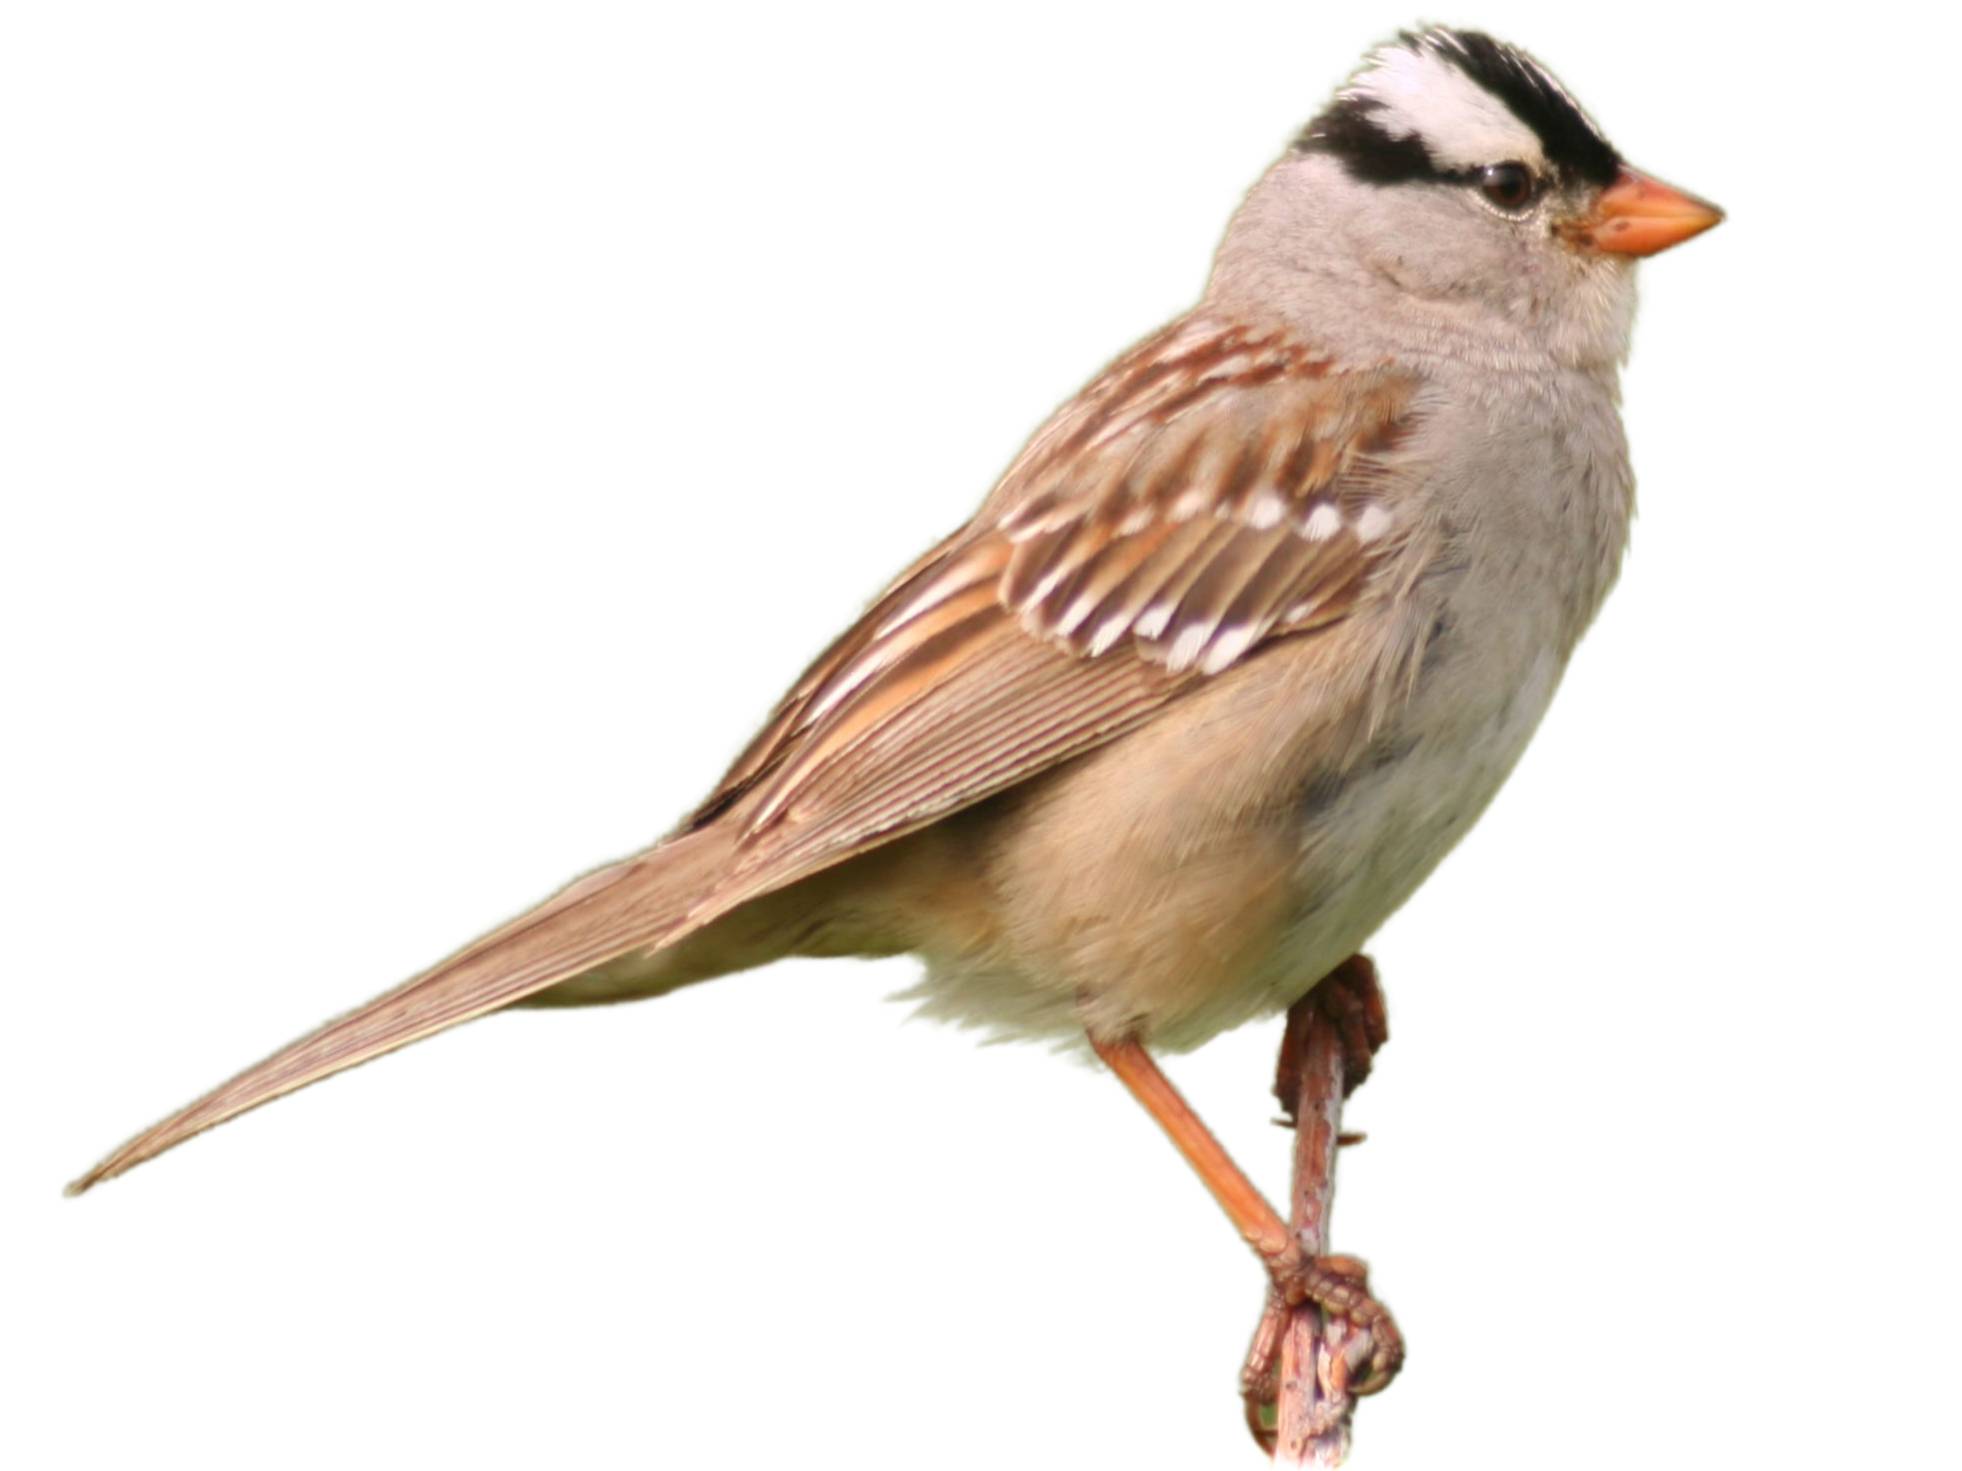 A photo of a White-crowned Sparrow (Zonotrichia leucophrys)